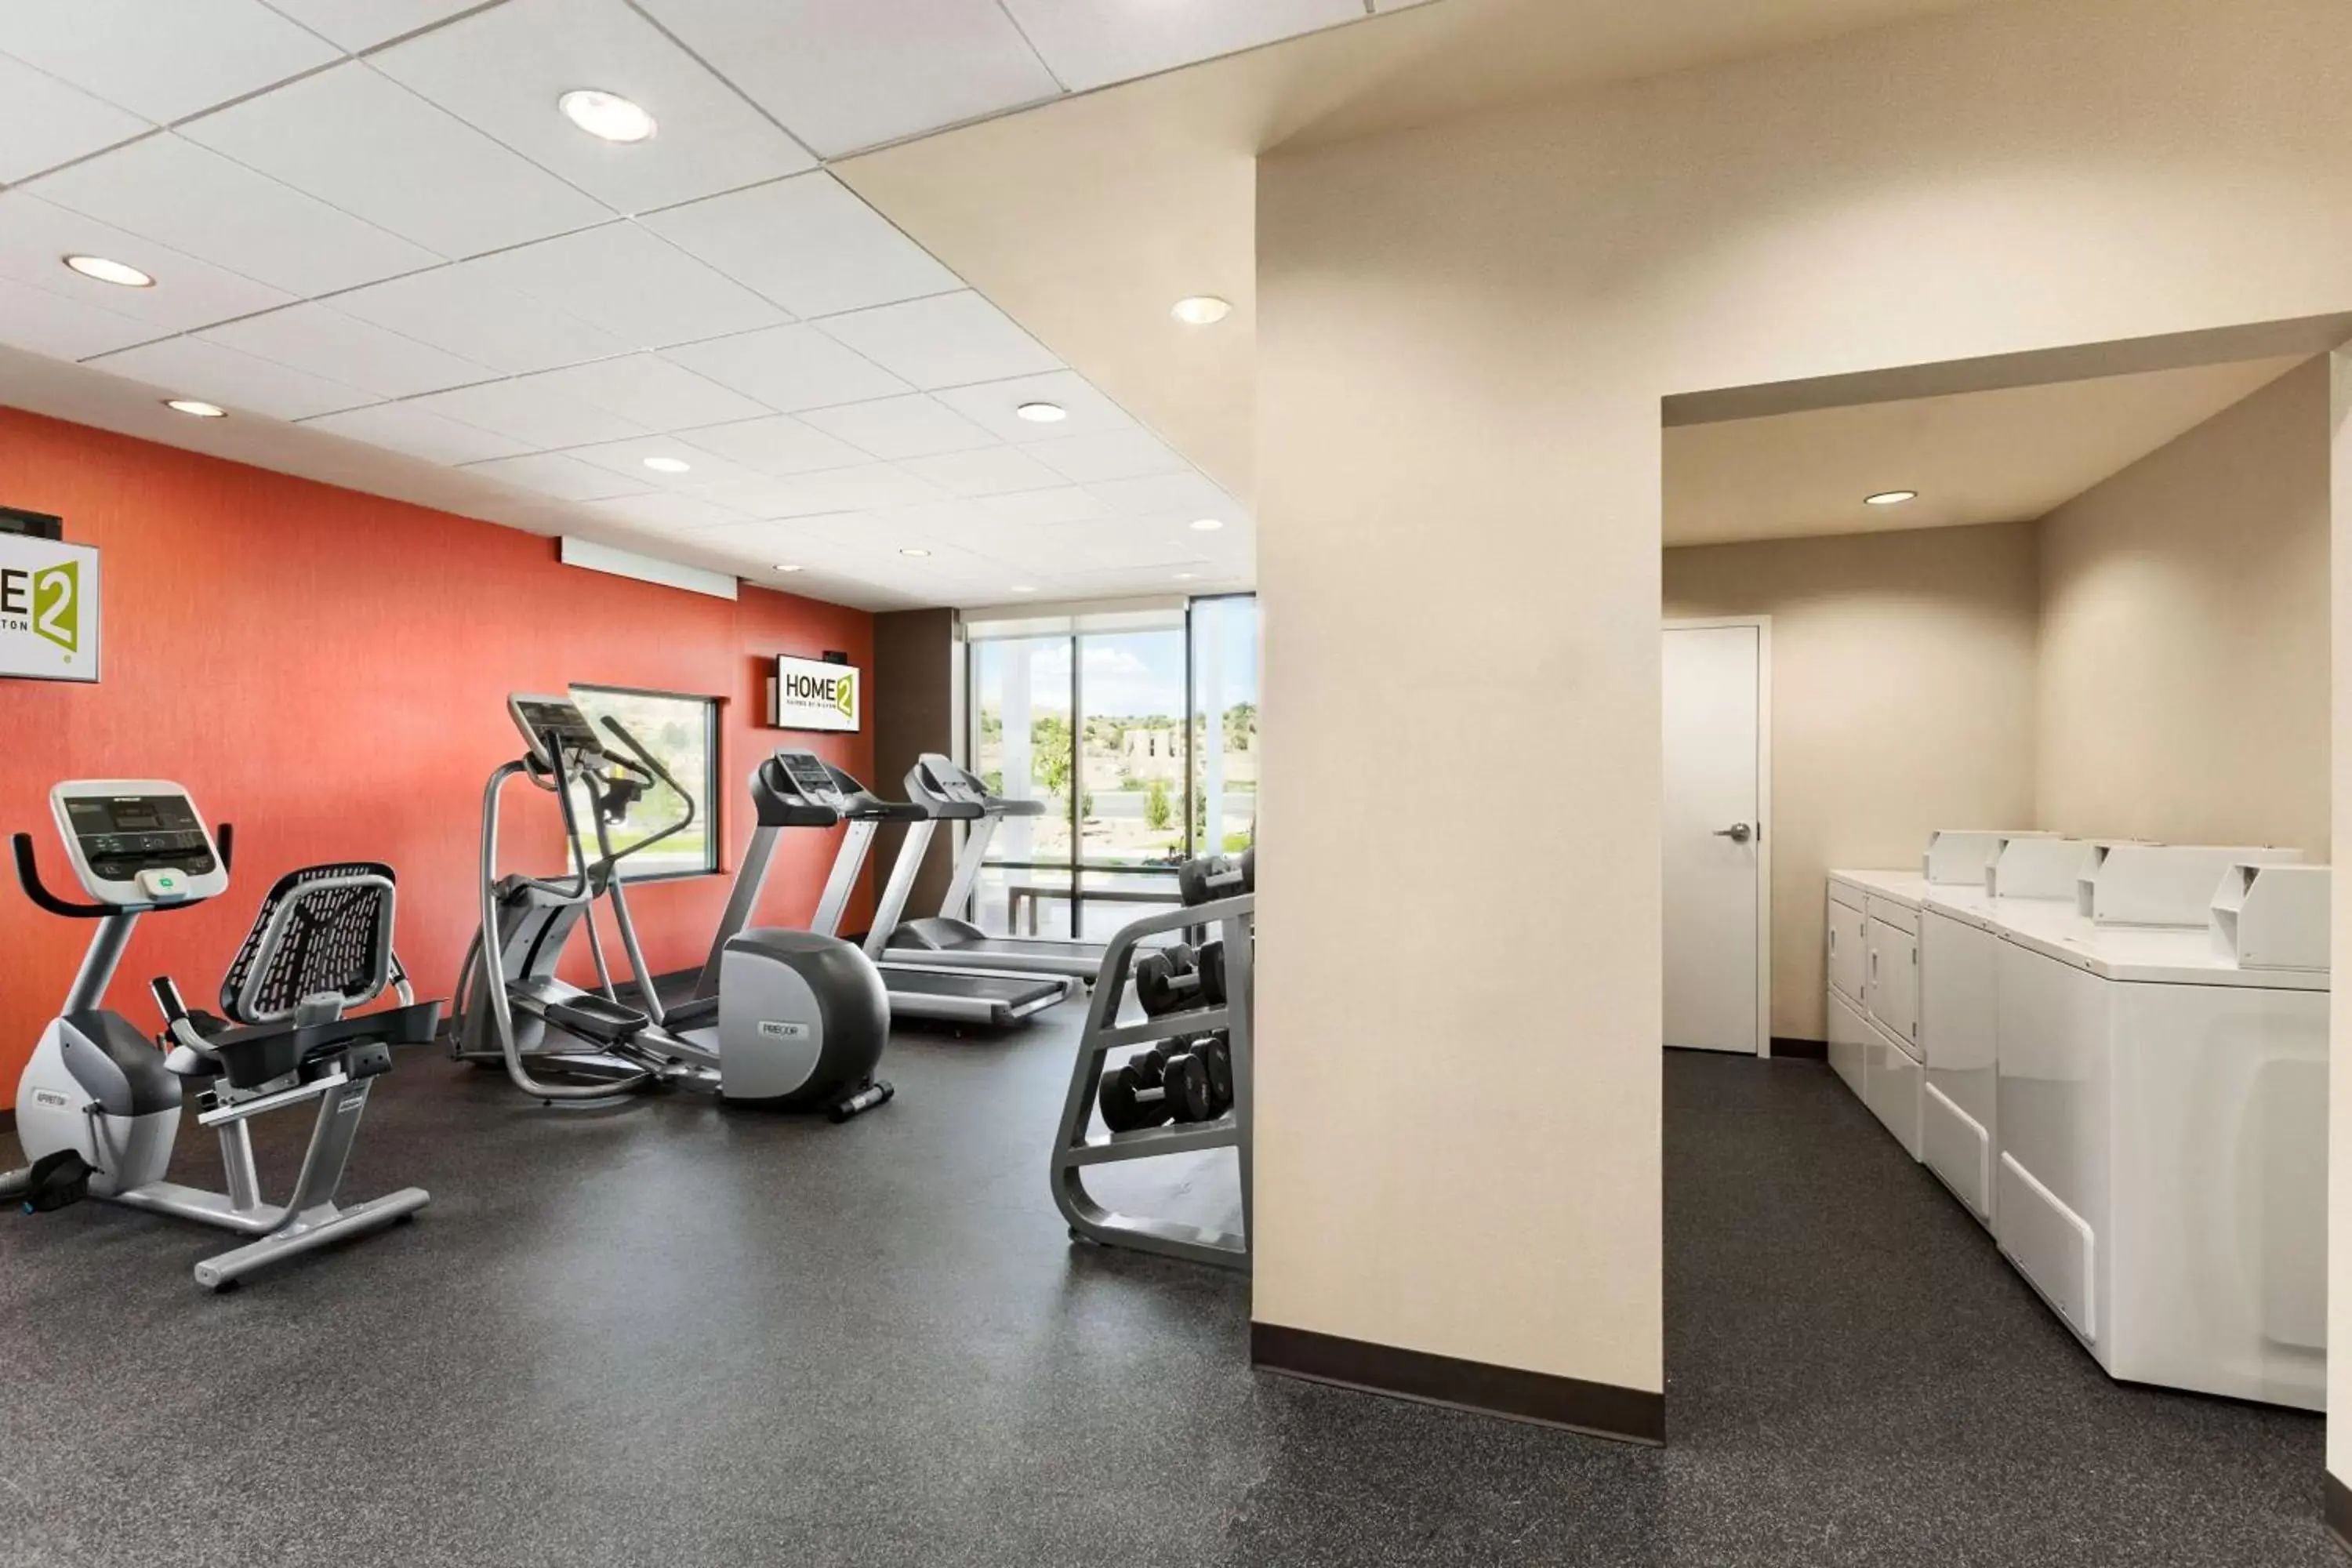 Fitness centre/facilities, Fitness Center/Facilities in Home2 Suites By Hilton Farmington/Bloomfield